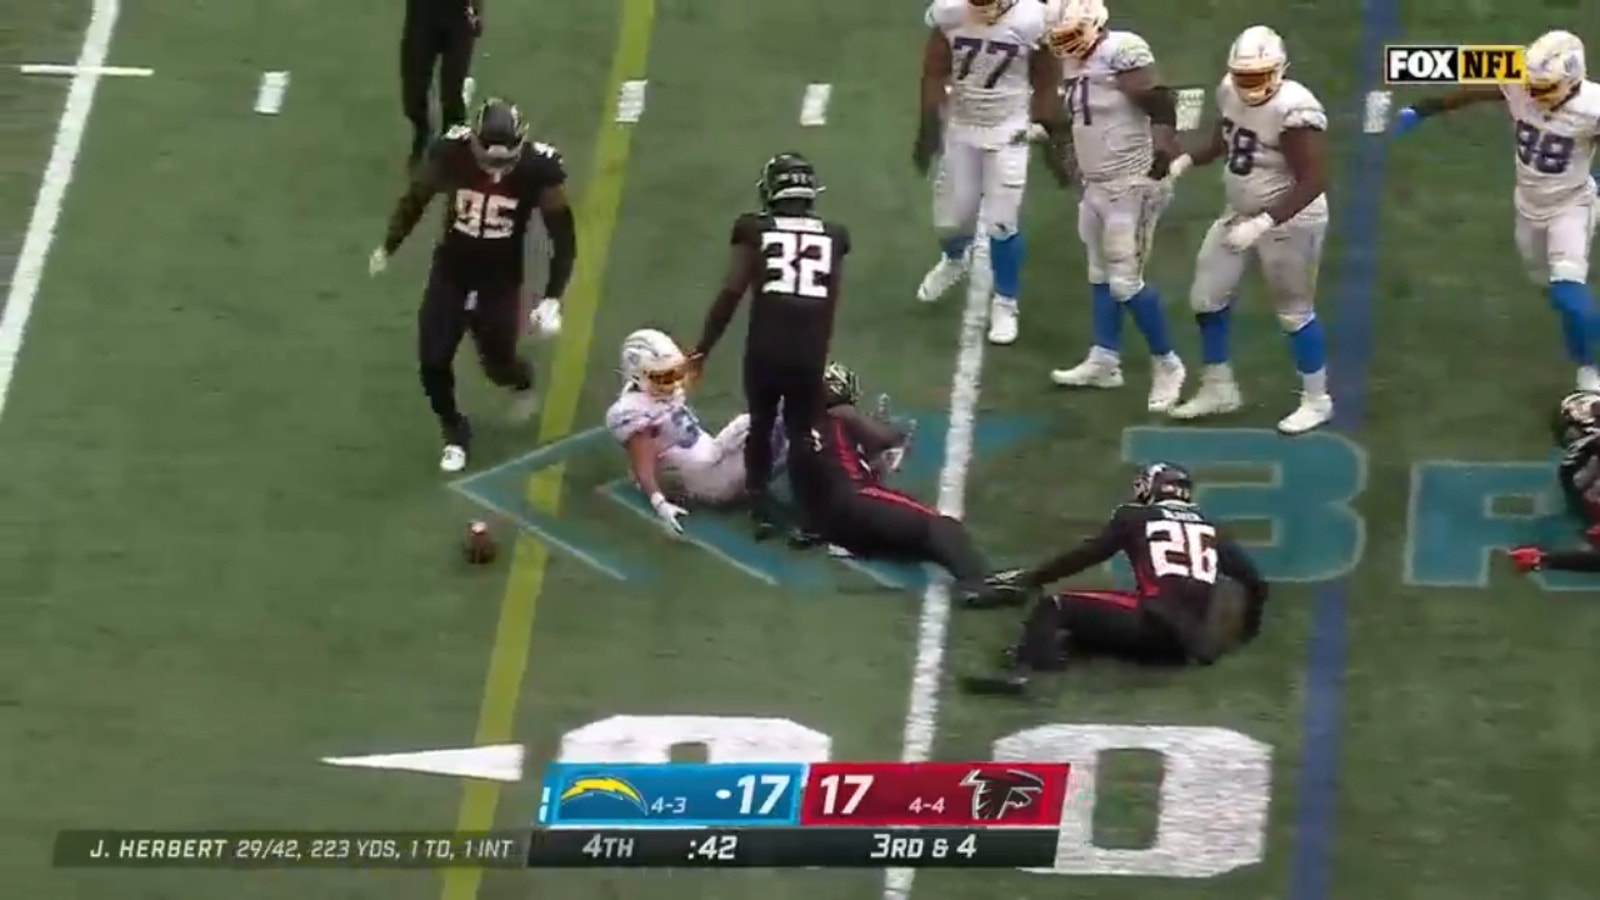 Chargers, Falcons fumble twice on same play